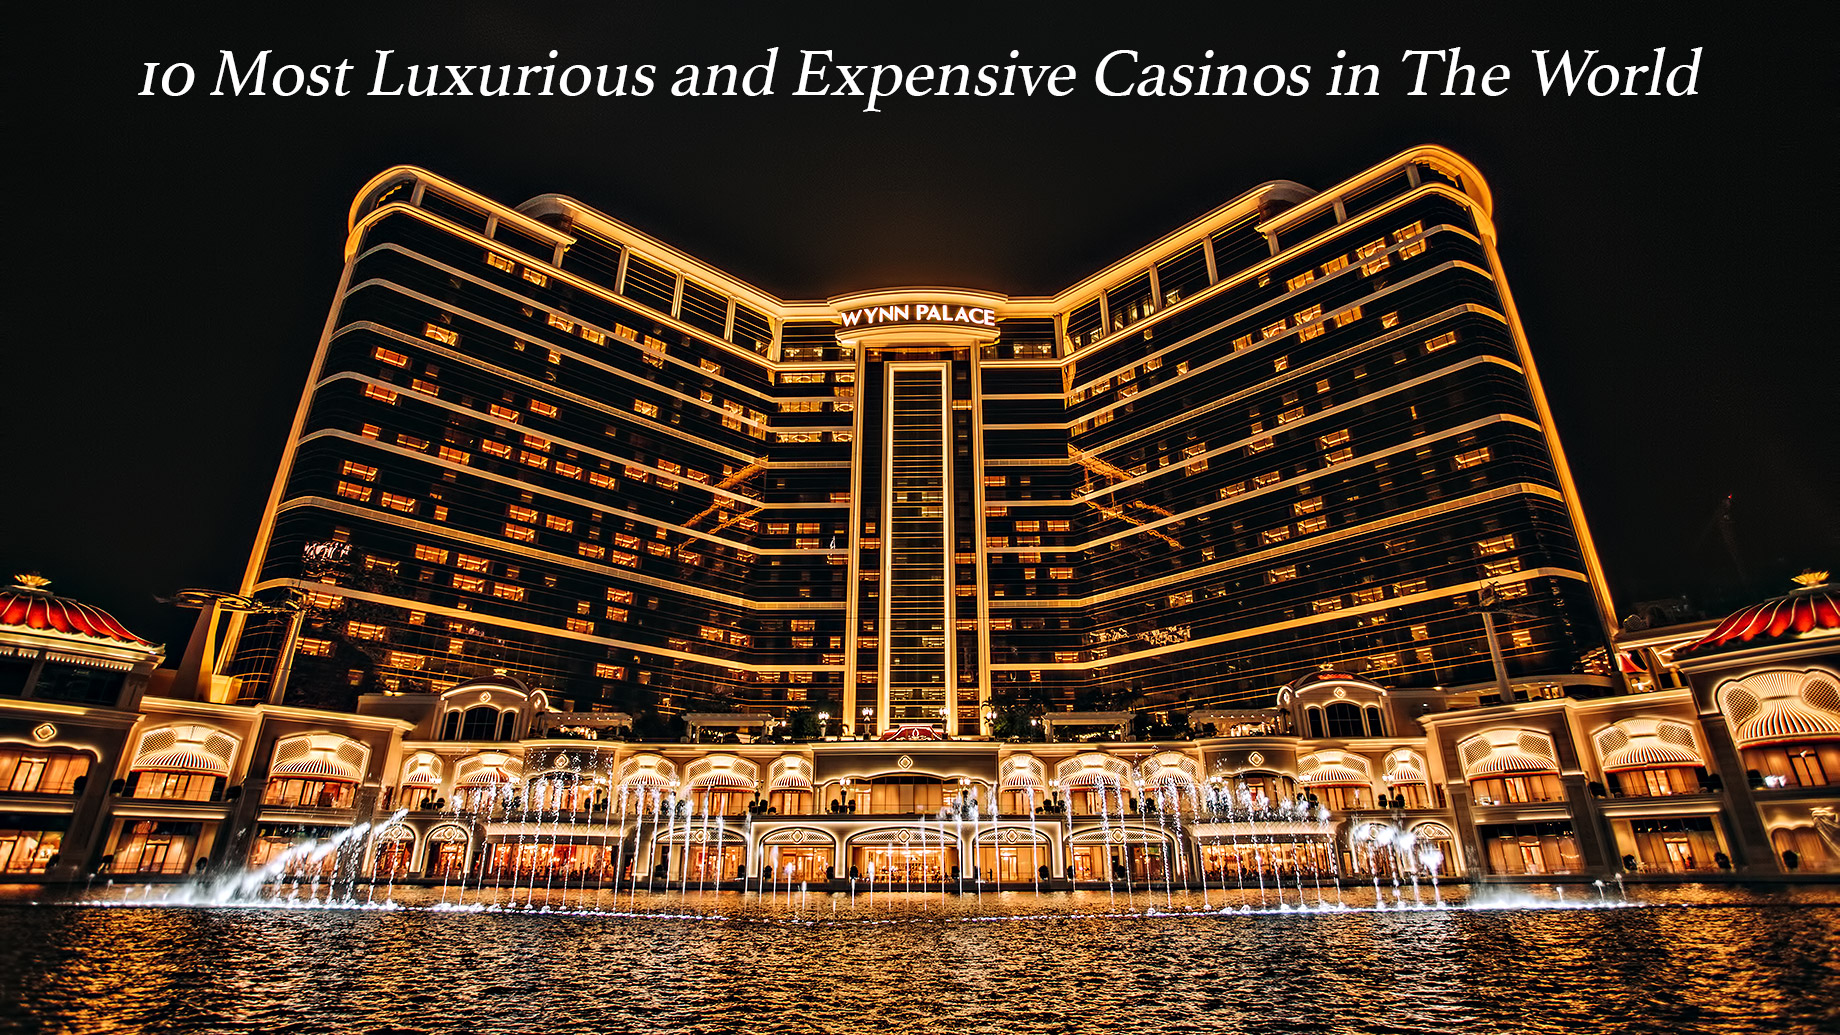 10 Most Luxurious and Expensive Casinos in The World